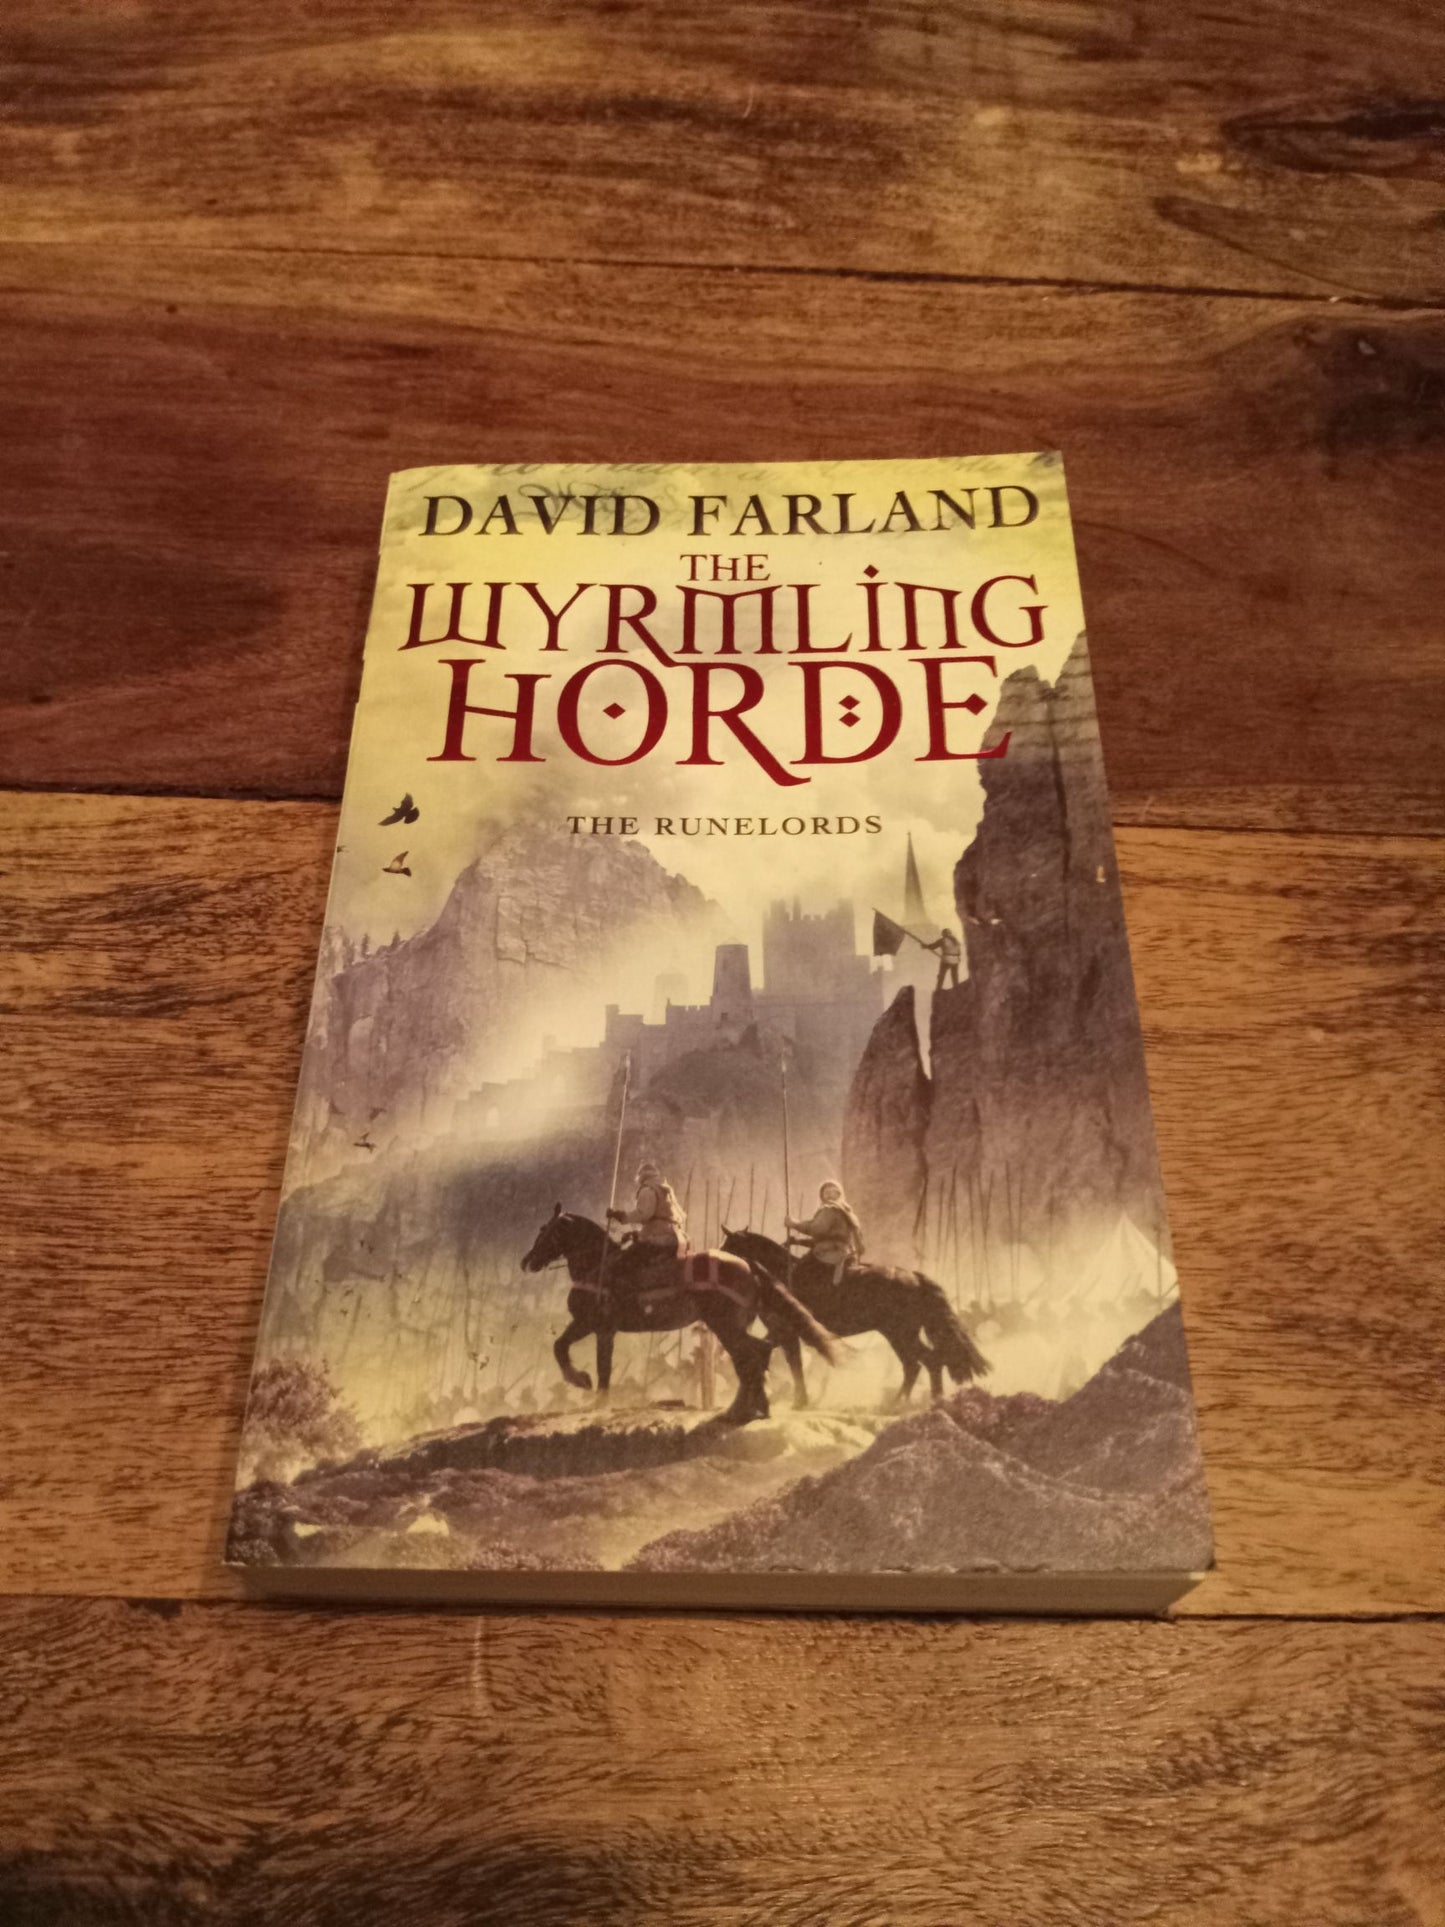 The Wyrmling Horde The Runelords #7 David Farland 2009